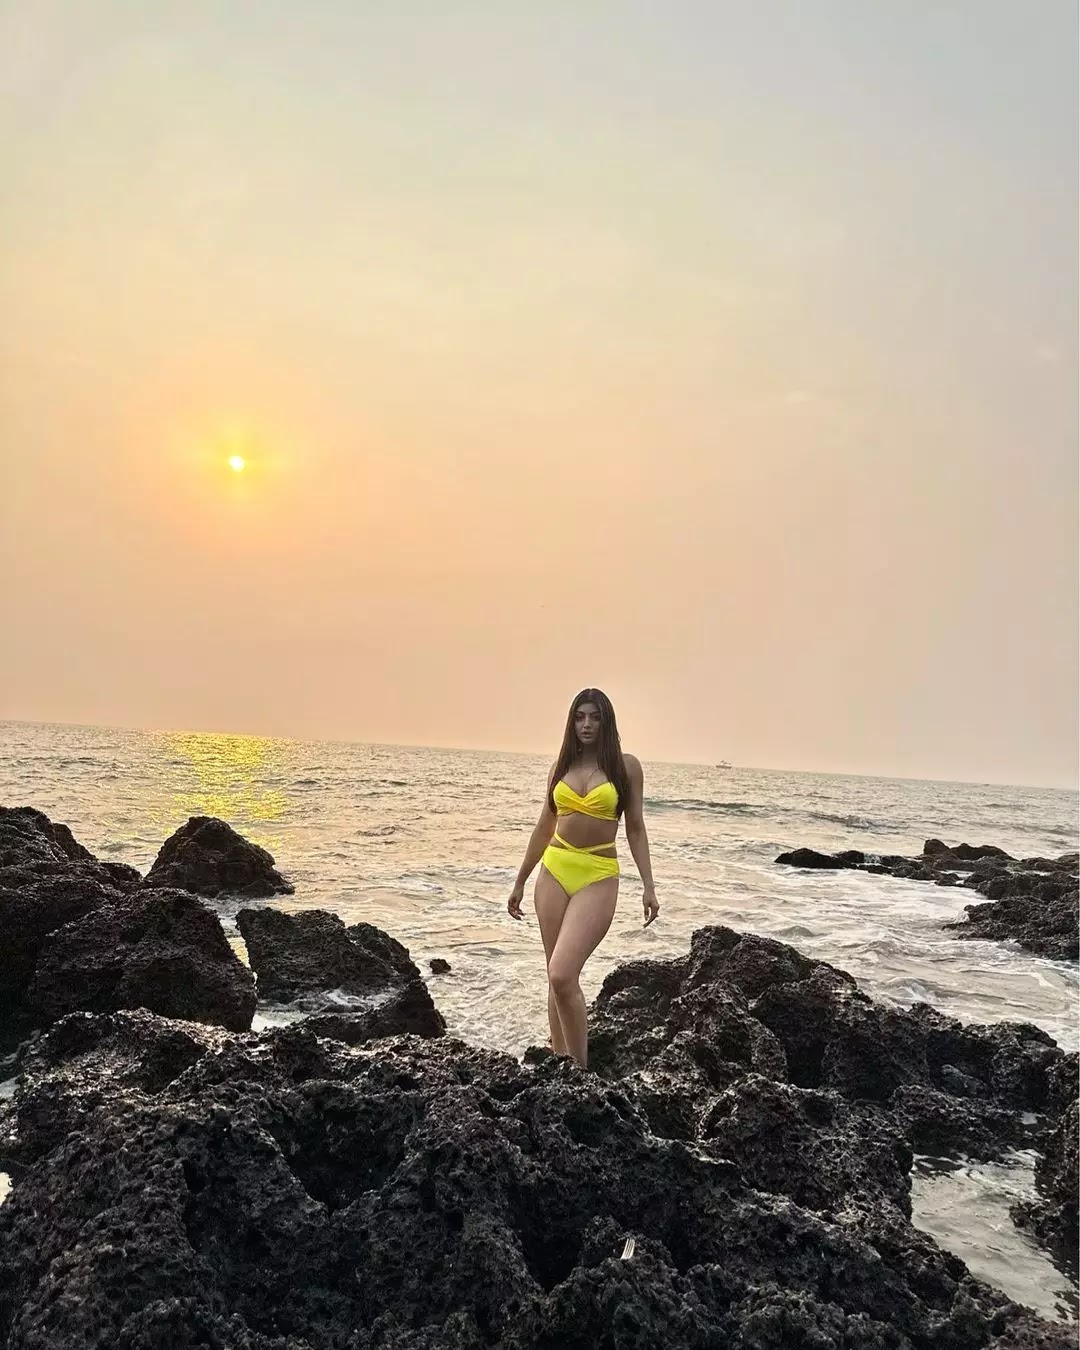 Akanksha Puri. Akanksha Puri hot bikini. Akanksha Puri hot videos. South Indian hot model Akanksha Puri. Akanksha Puri xxx.